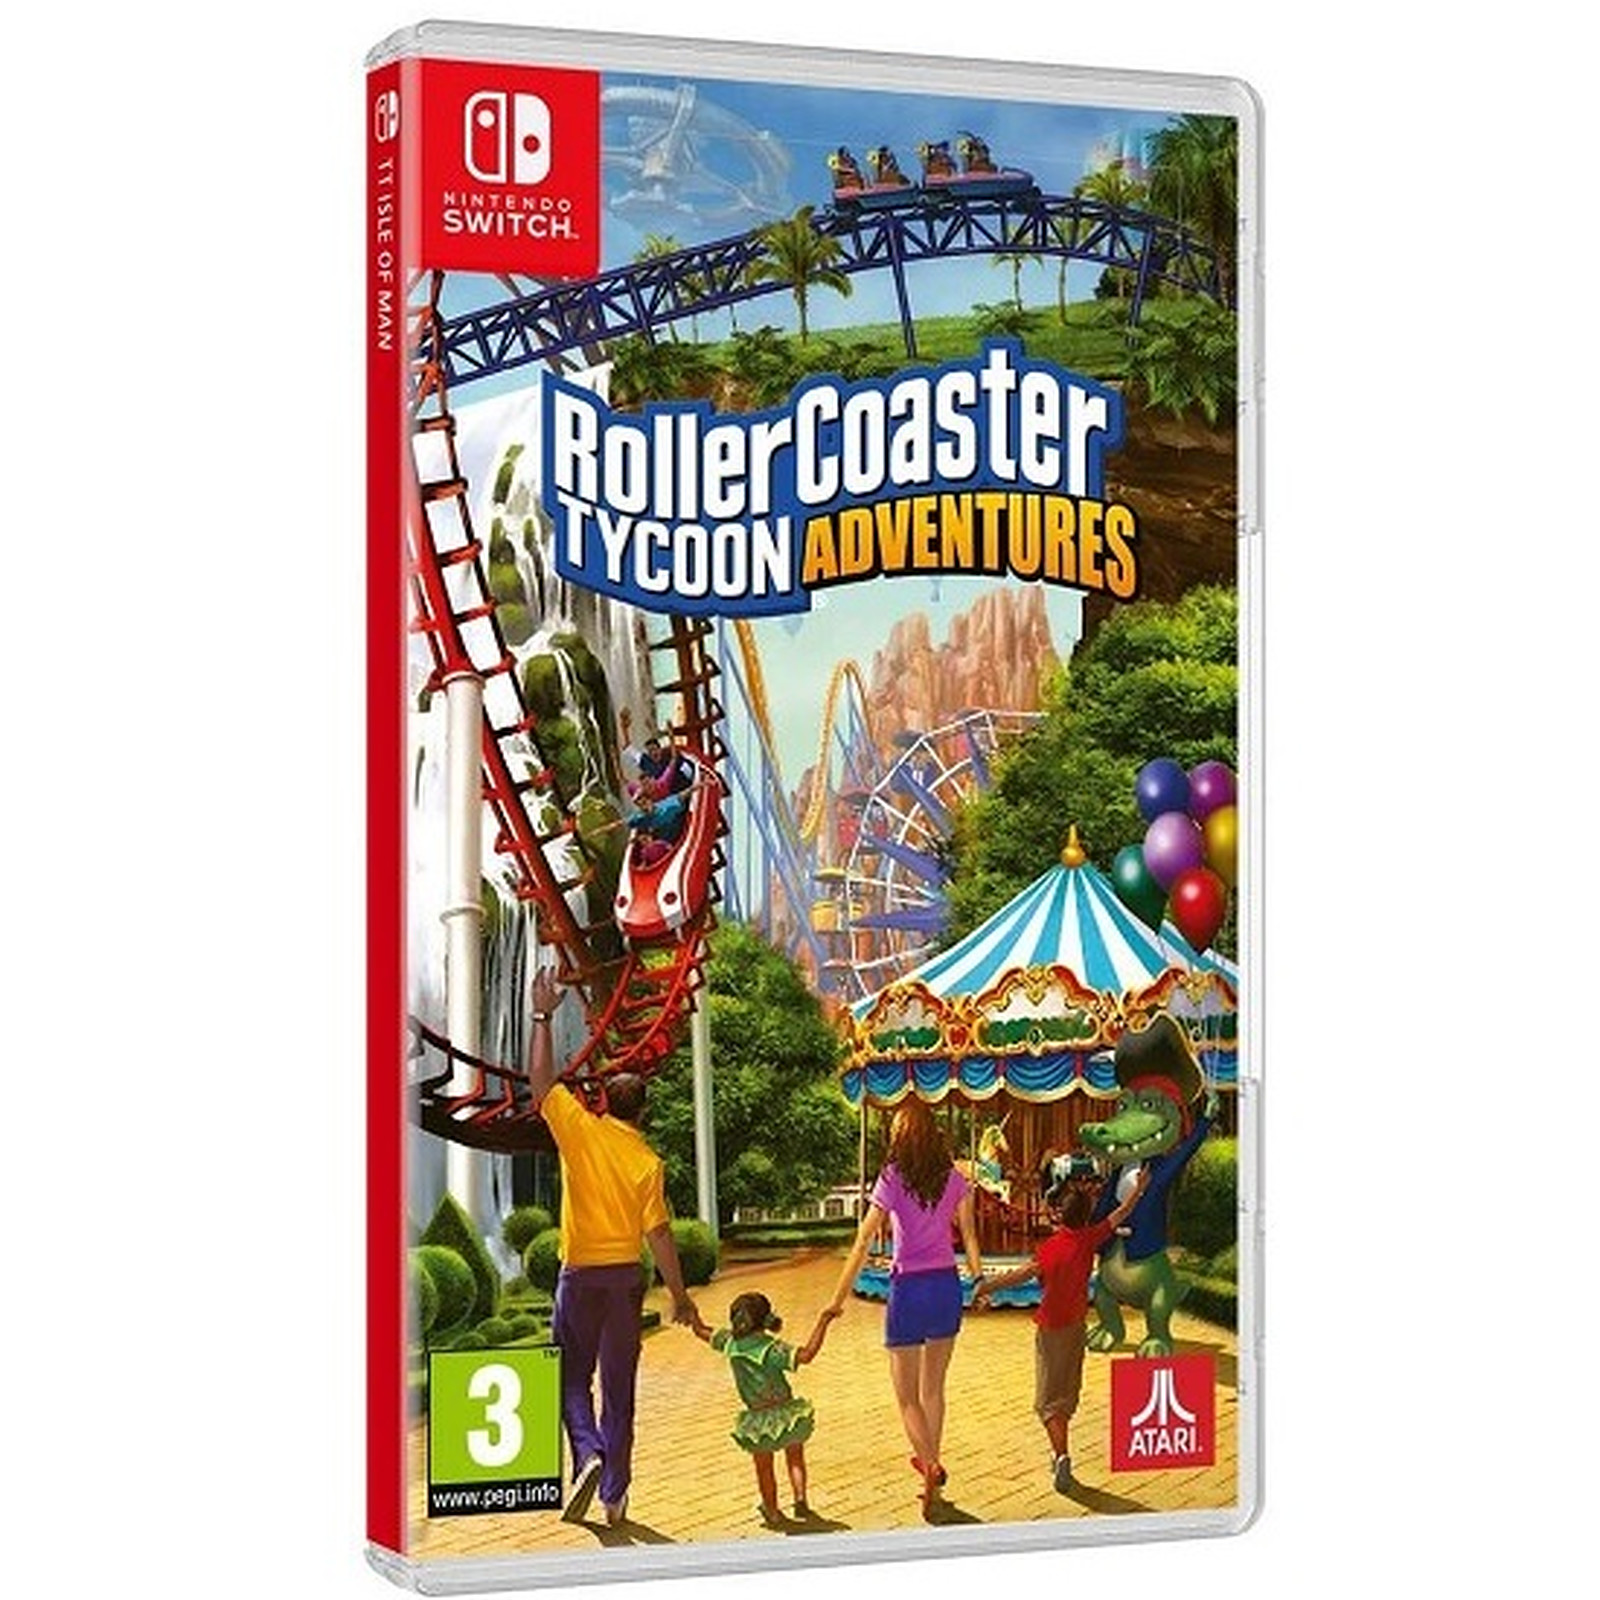 Rollercoaster Tycoon Adventures (Switch) - Jeux Nintendo Switch Bigben Interactive